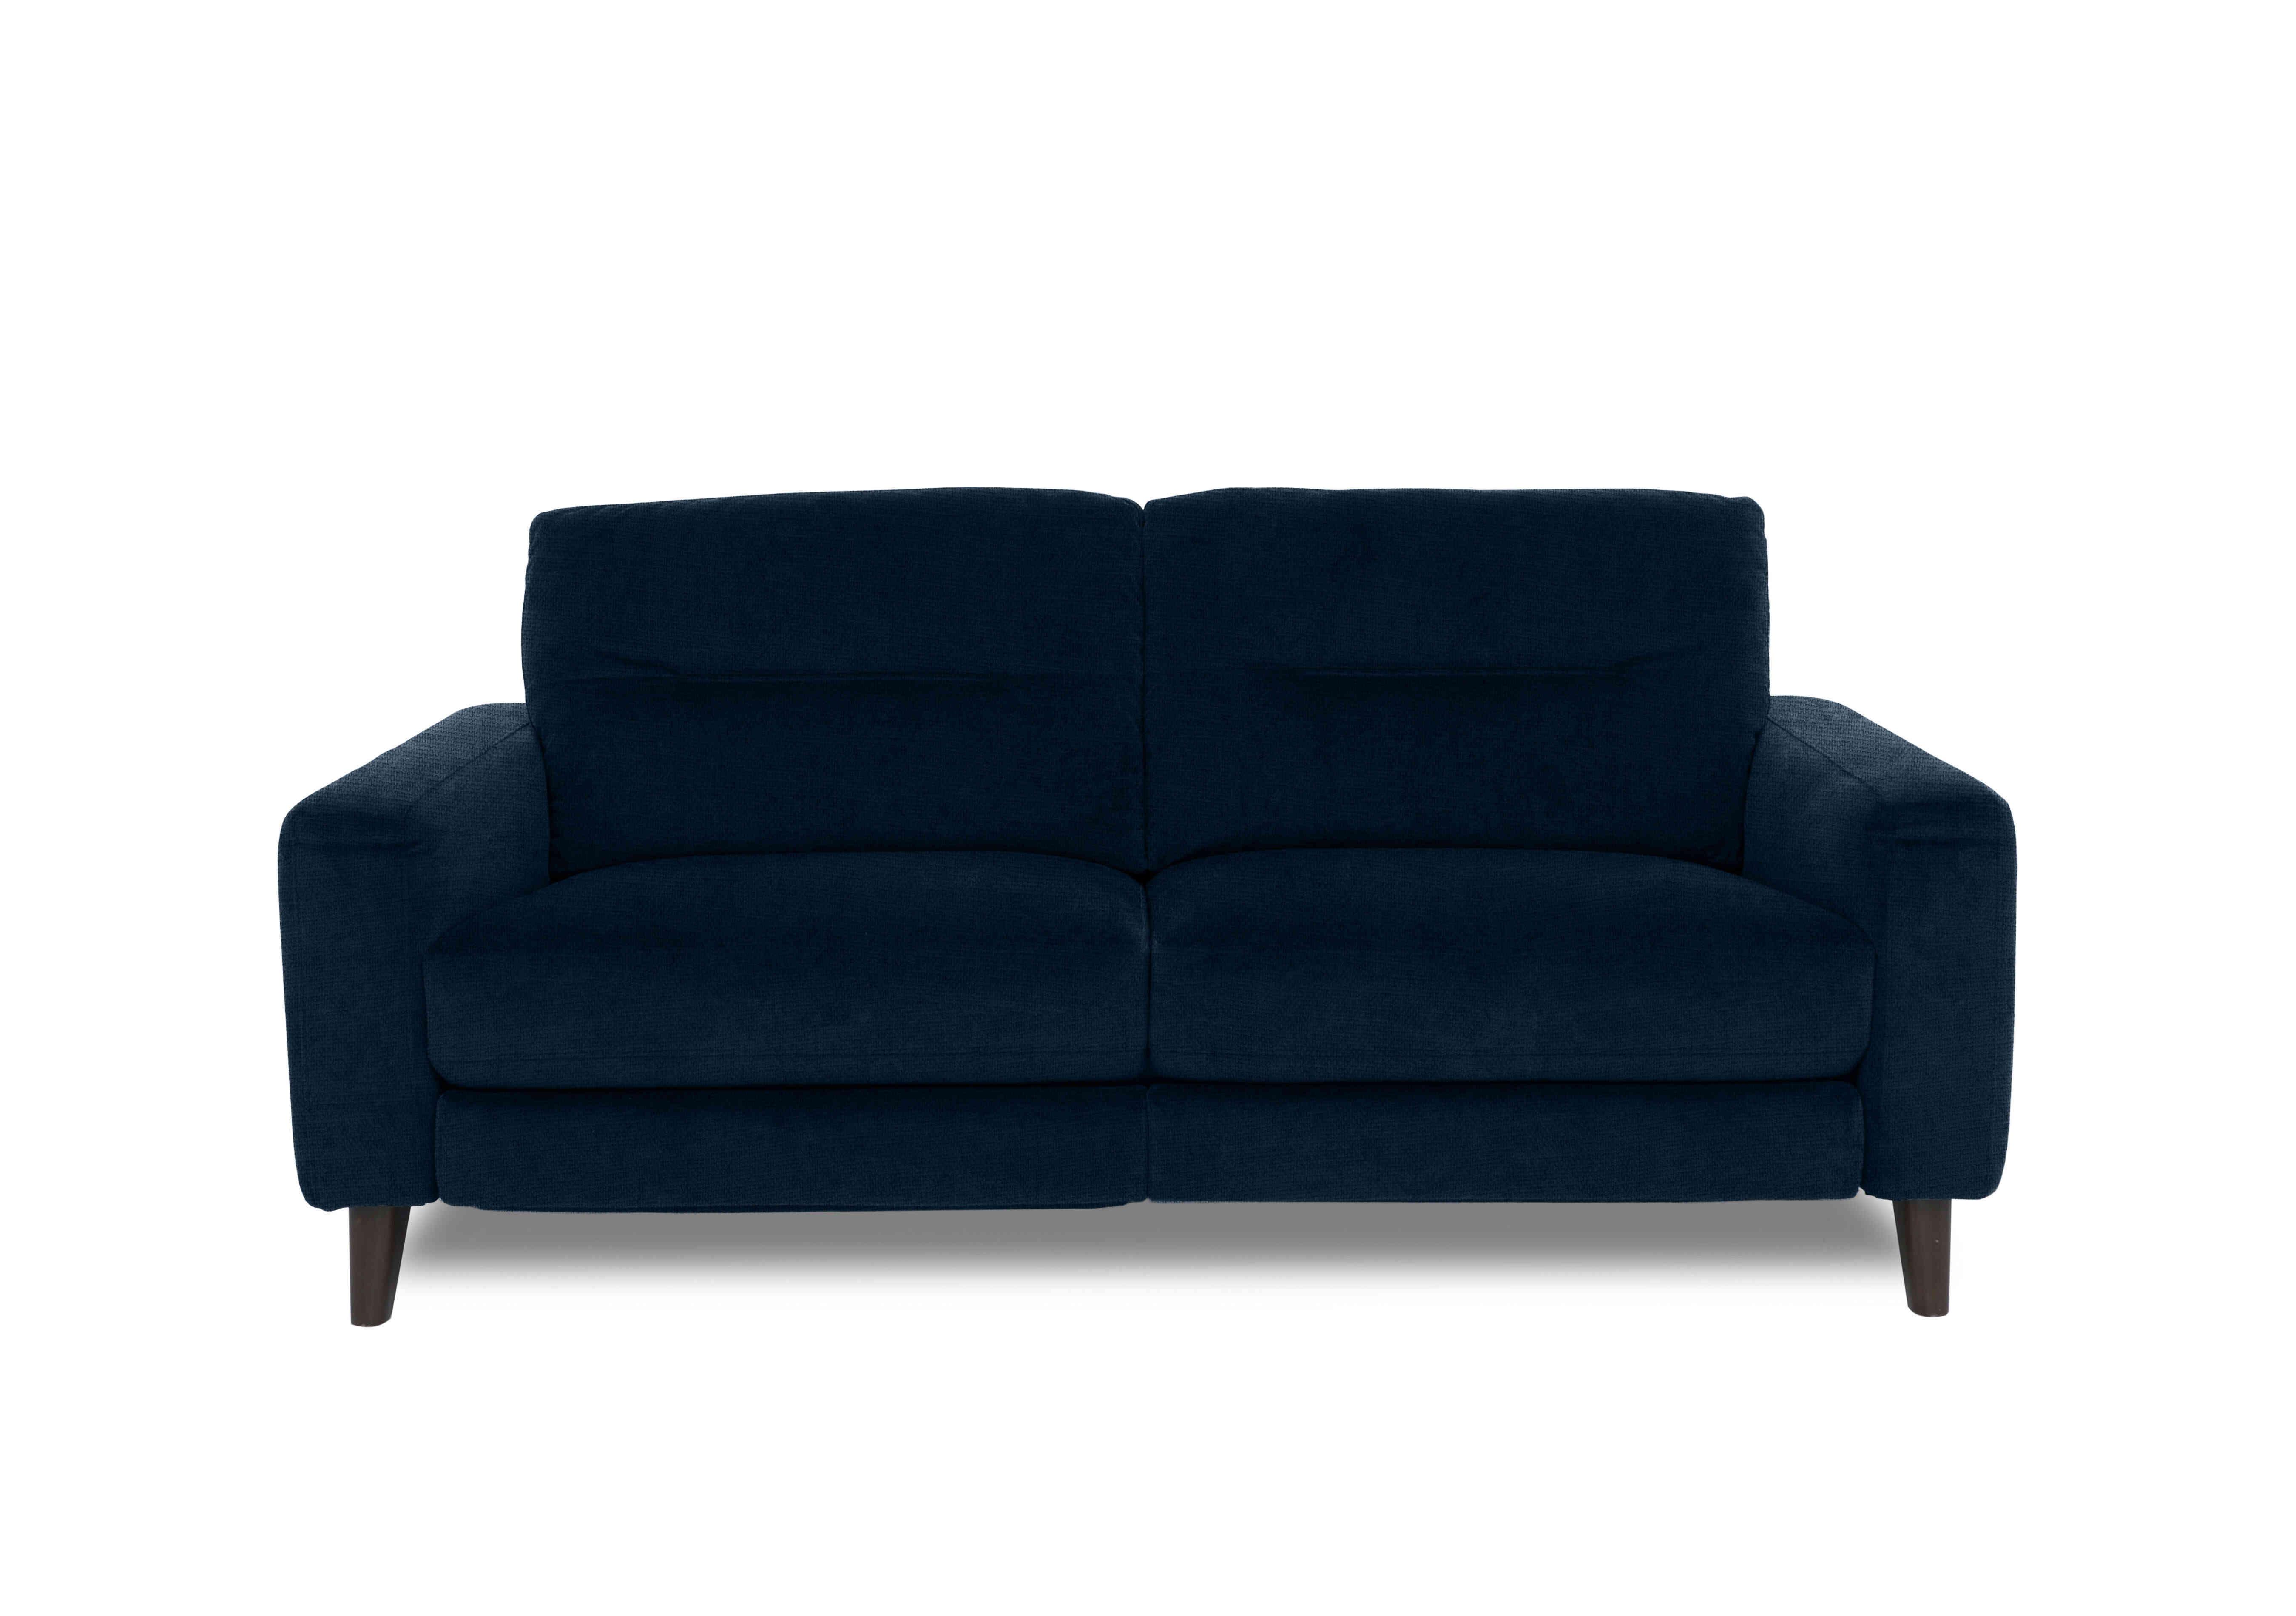 Jules 3 Seater Fabric Power Recliner Sofa in Fab-Coe-R304 Navy Blue on Furniture Village